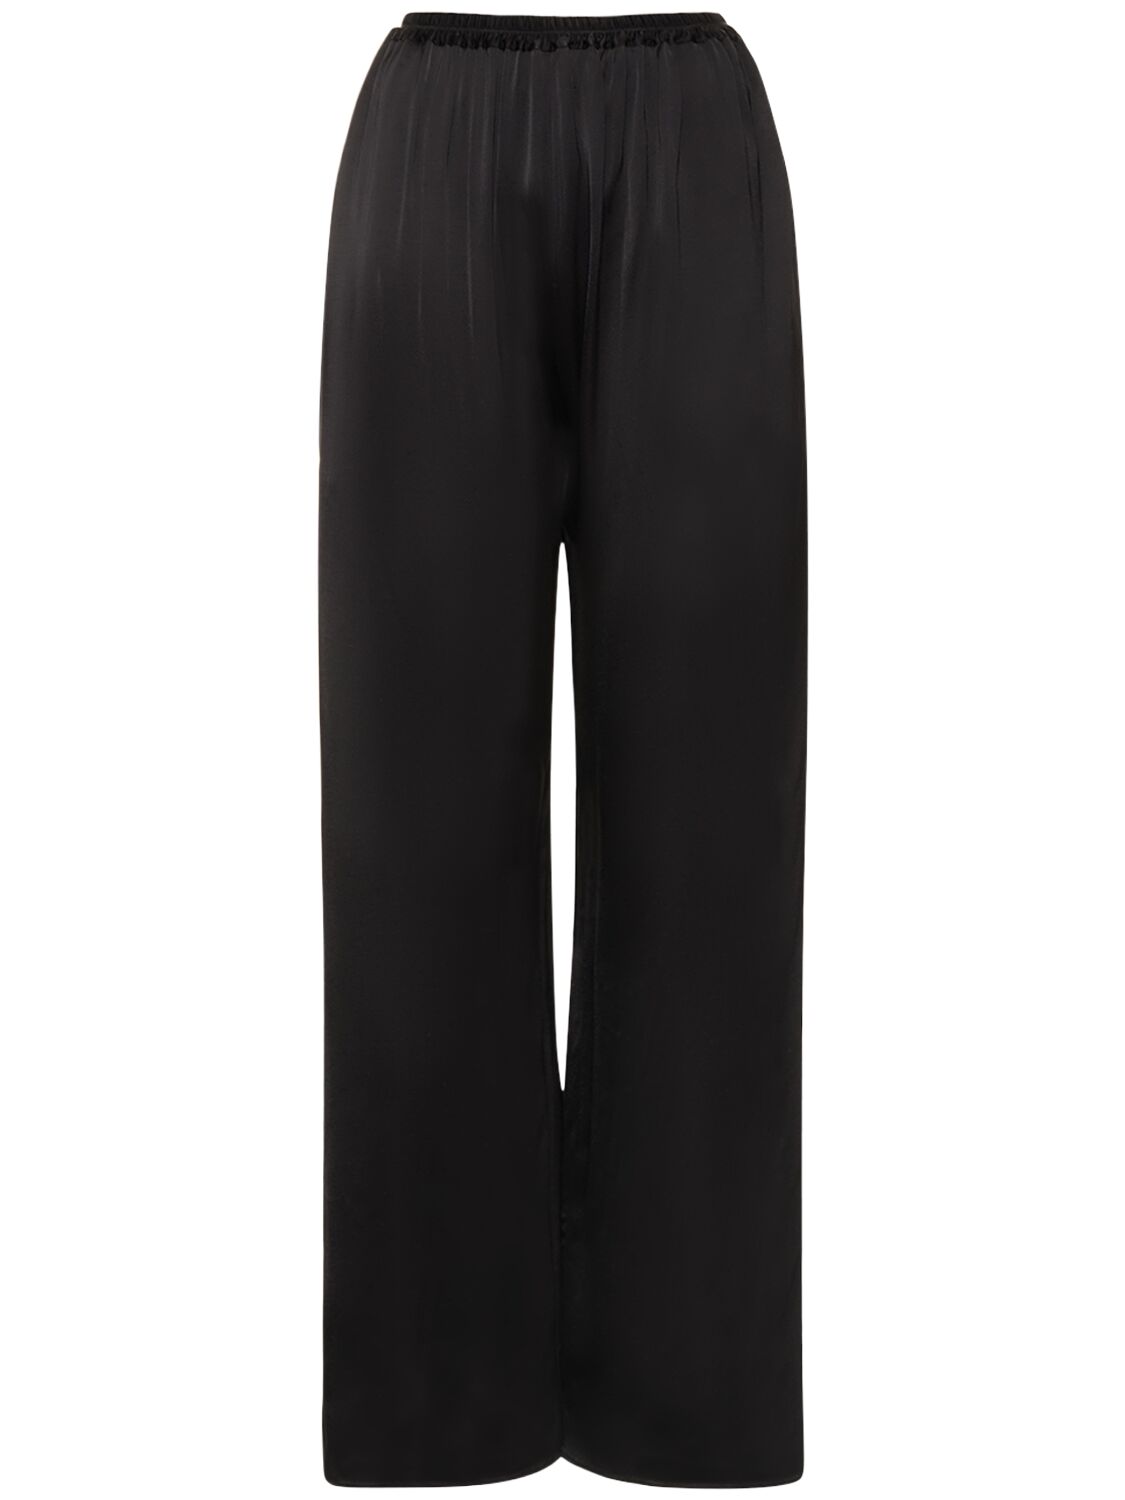 Matteau Relaxed Fit Viscose Satin Pants In Black